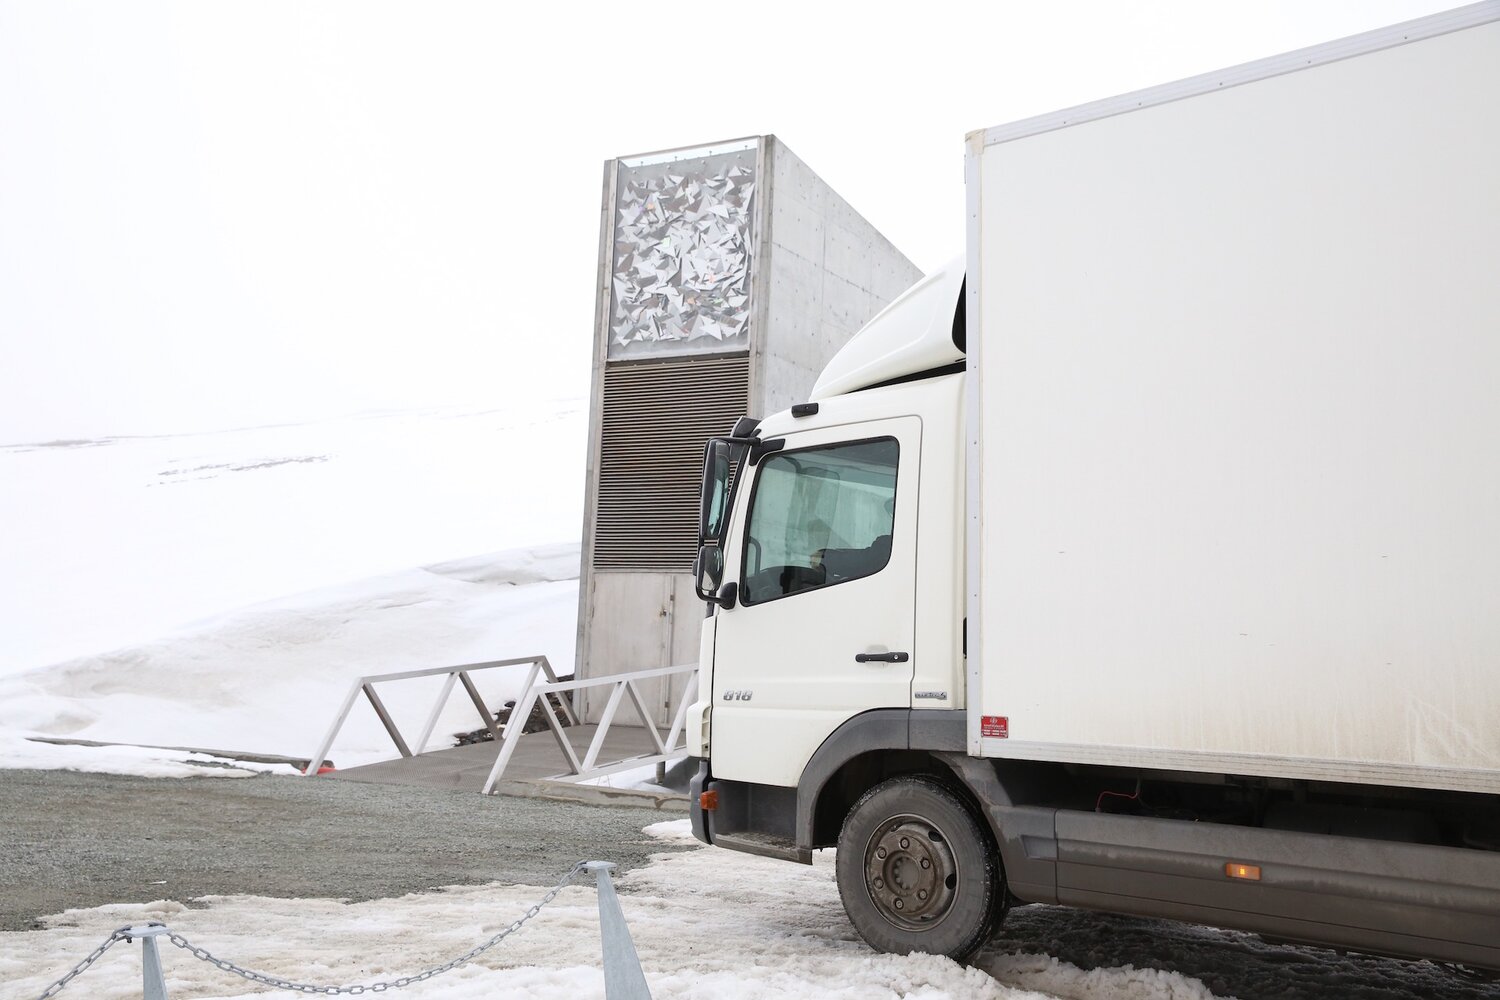 15 boxes of seeds arrive at the Svalbard Global Seed Vault